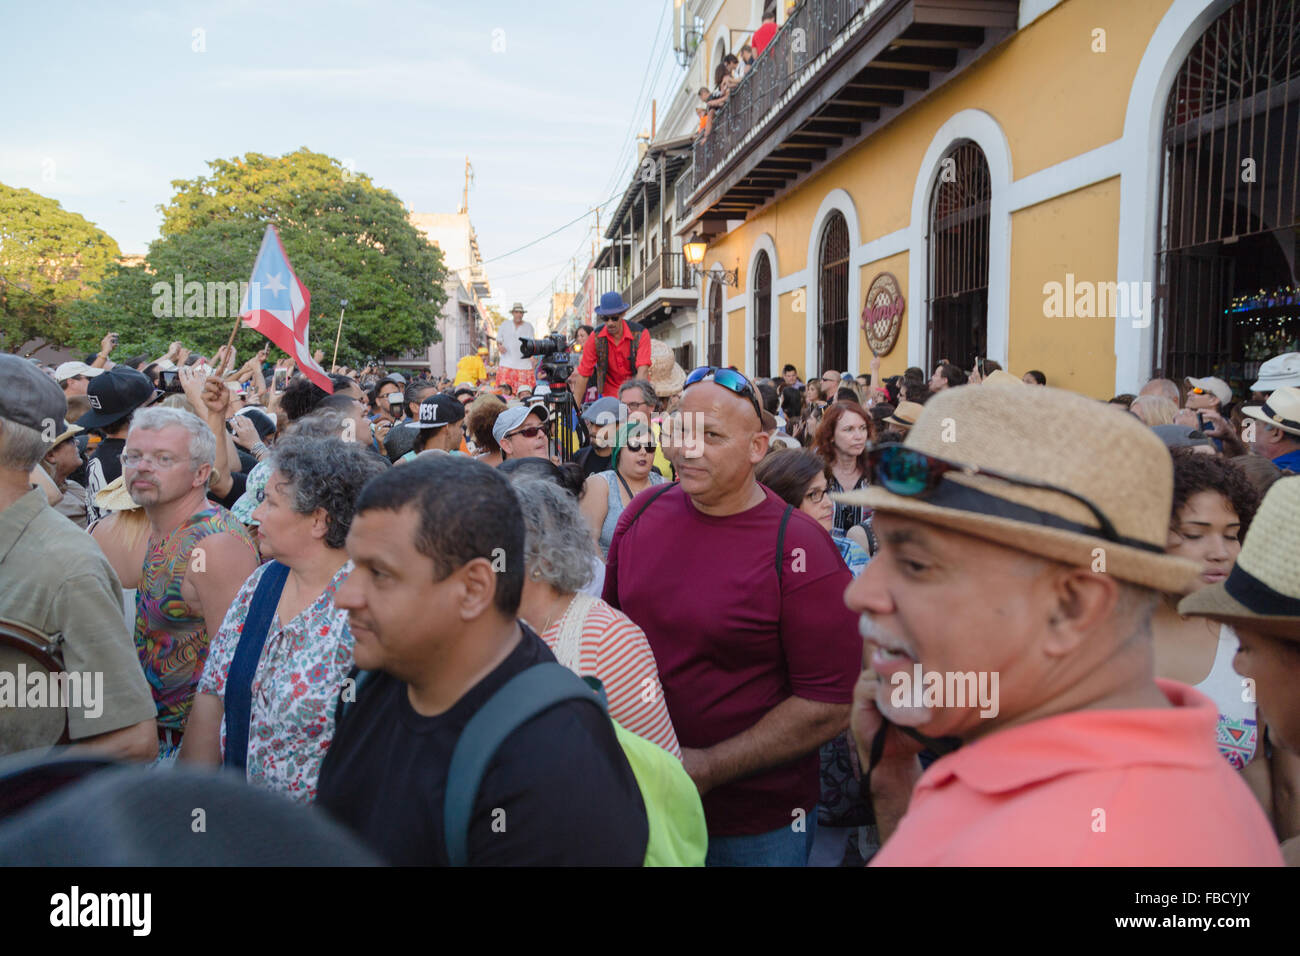 San Juan, Puerto Rico. 14th January, 2016.  The crowd fills the street of Old San Juan city for the street festival. Maria S./Alamy Live News Stock Photo